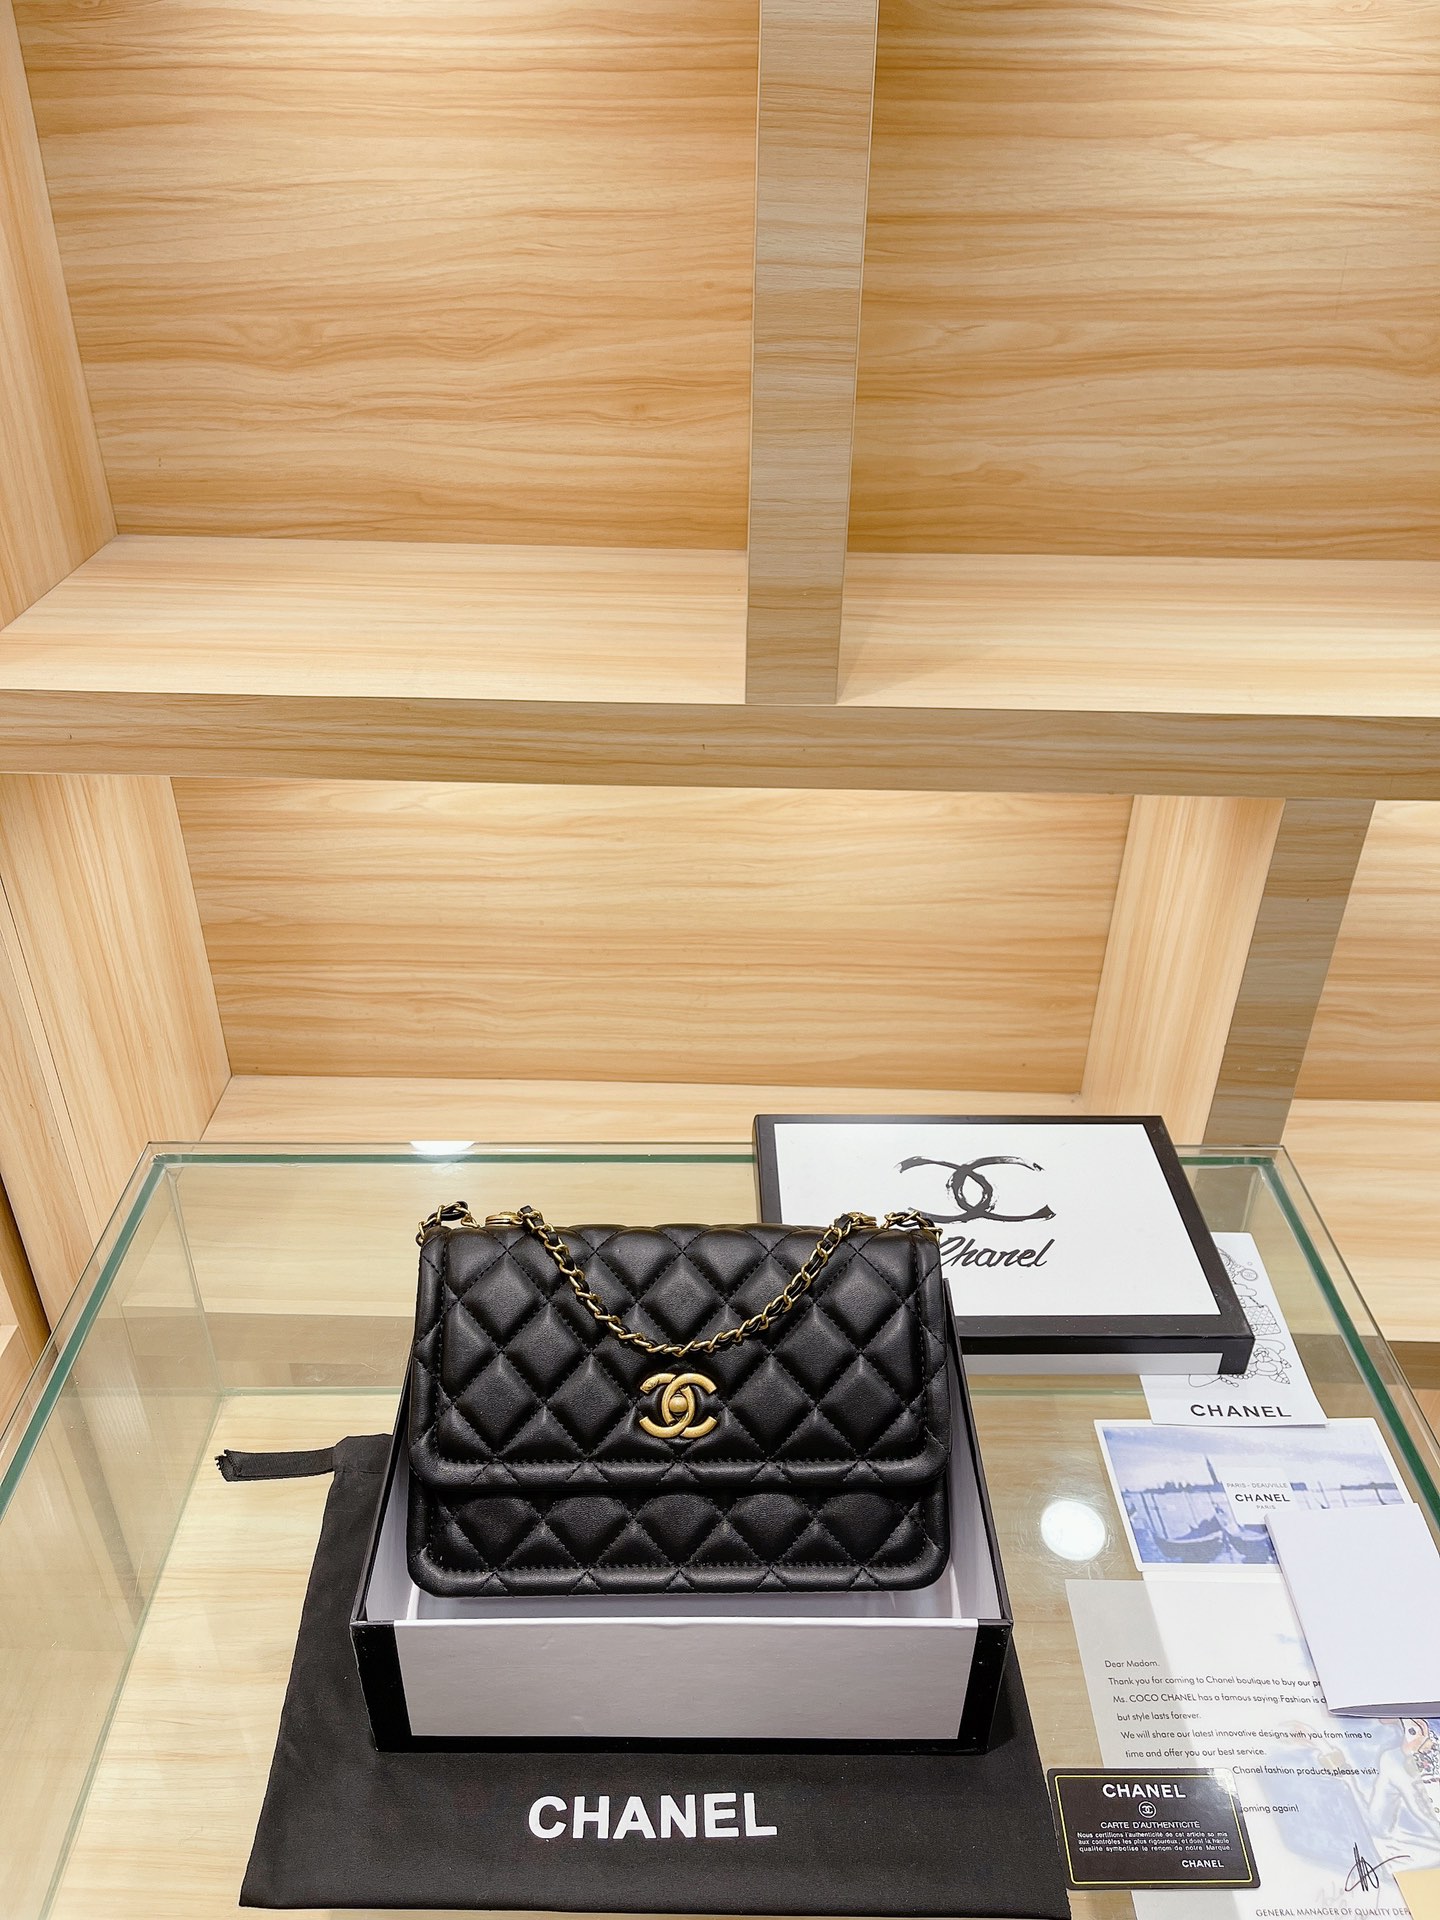 Chanel 19 new smallest model, but I choose to buy replica bags (2022 updated)-Best Quality Fake Louis Vuitton Bag Online Store, Replica designer bag ru